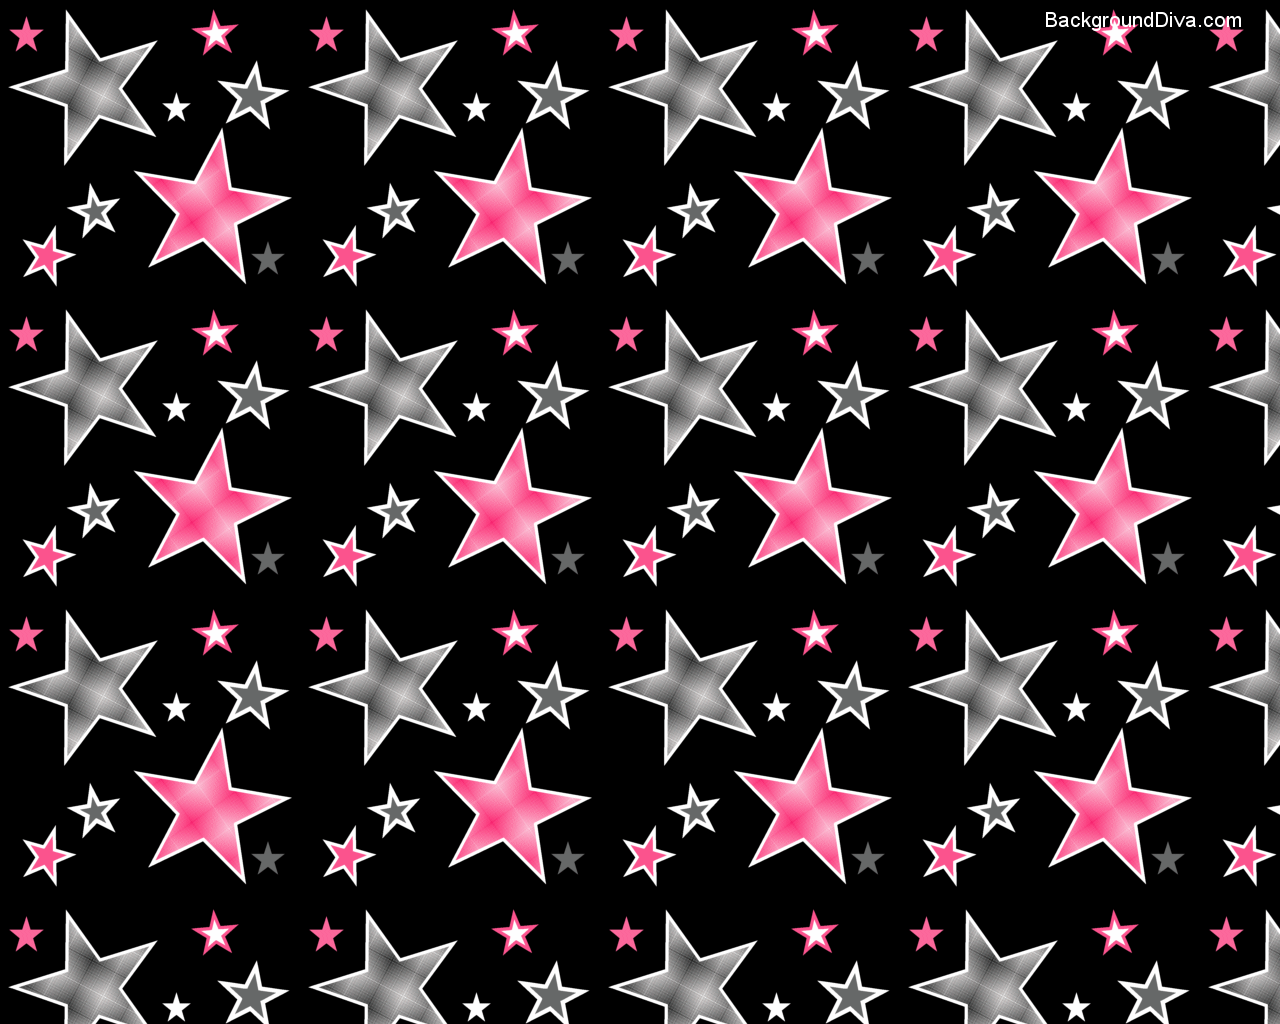 The Pic Wallpaper: Hot pink and black stars